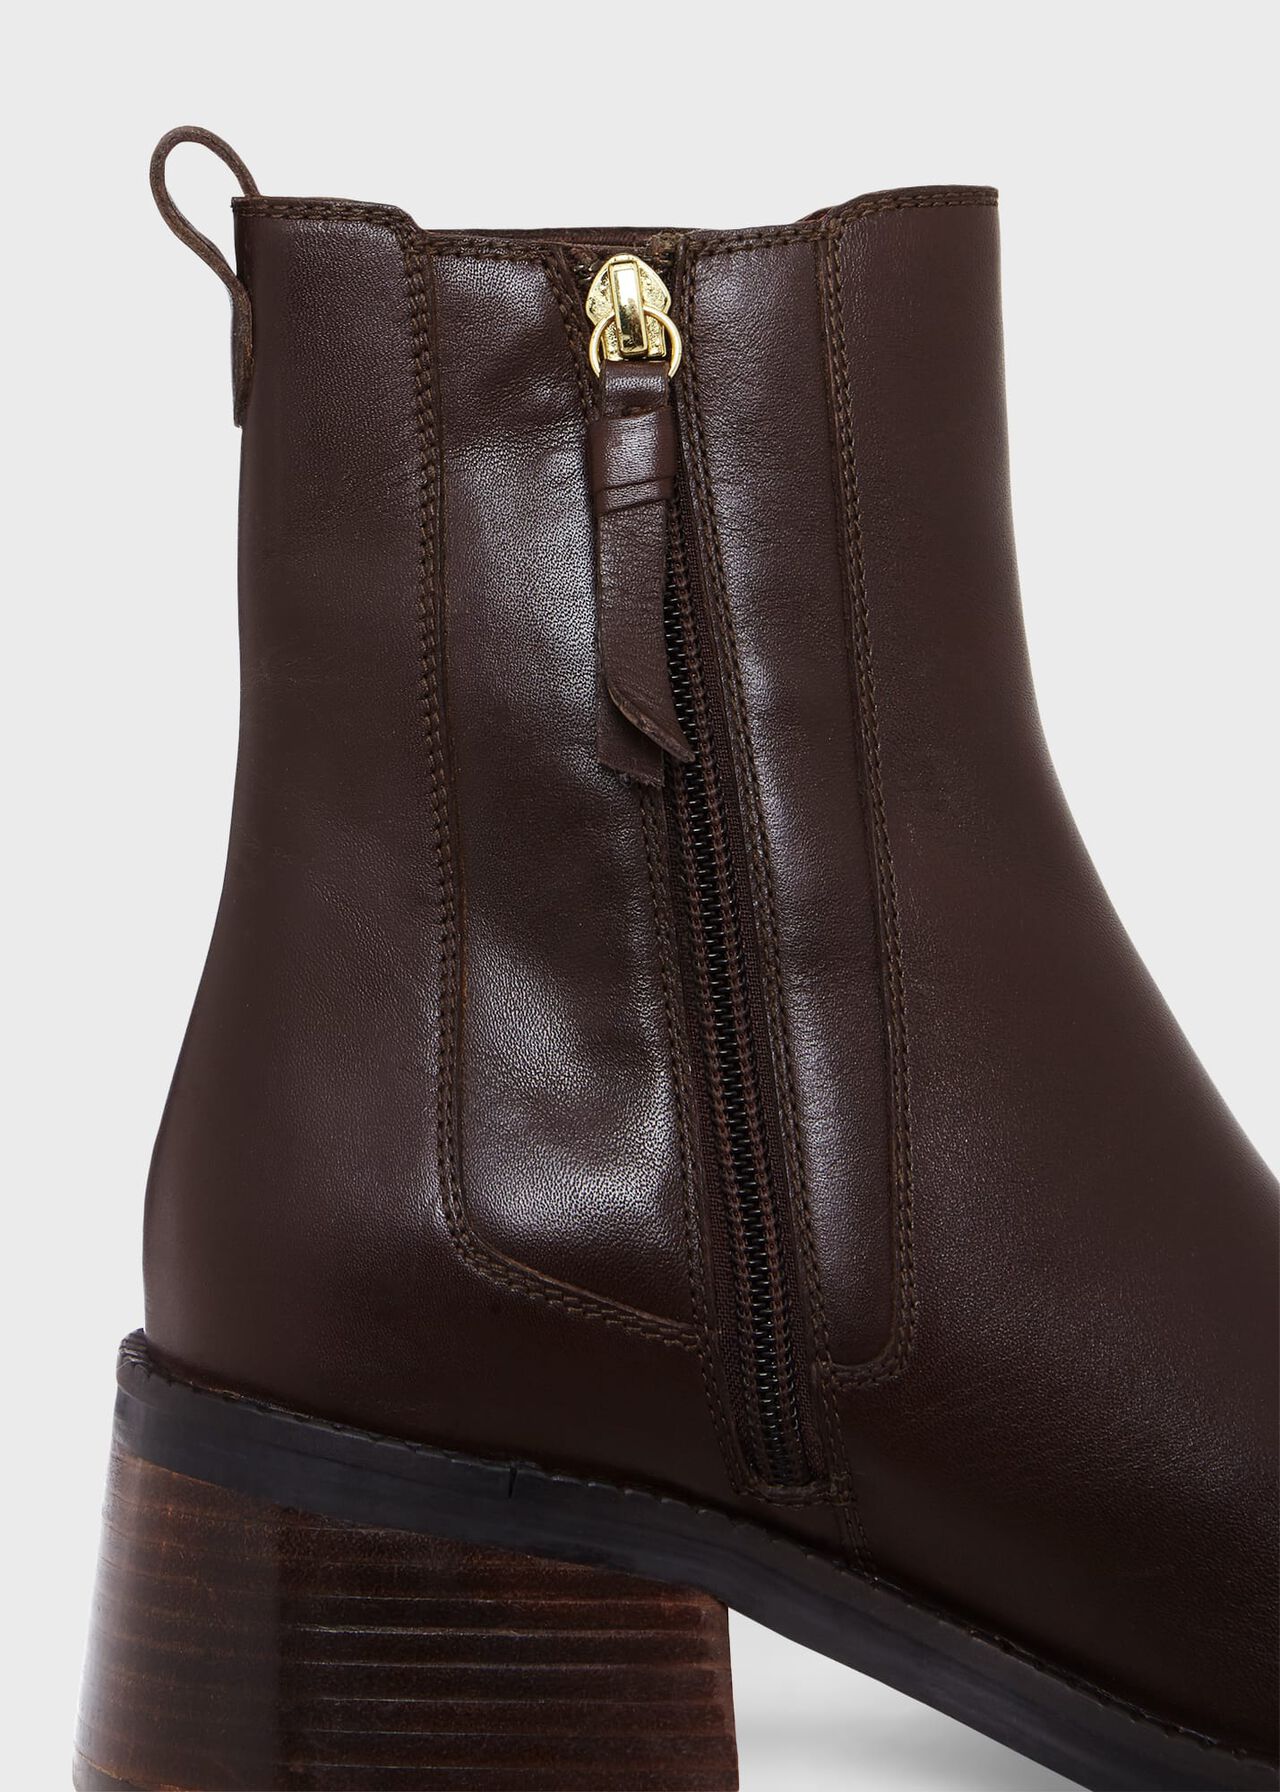 Fran Ankle Boots, Chocolate, hi-res